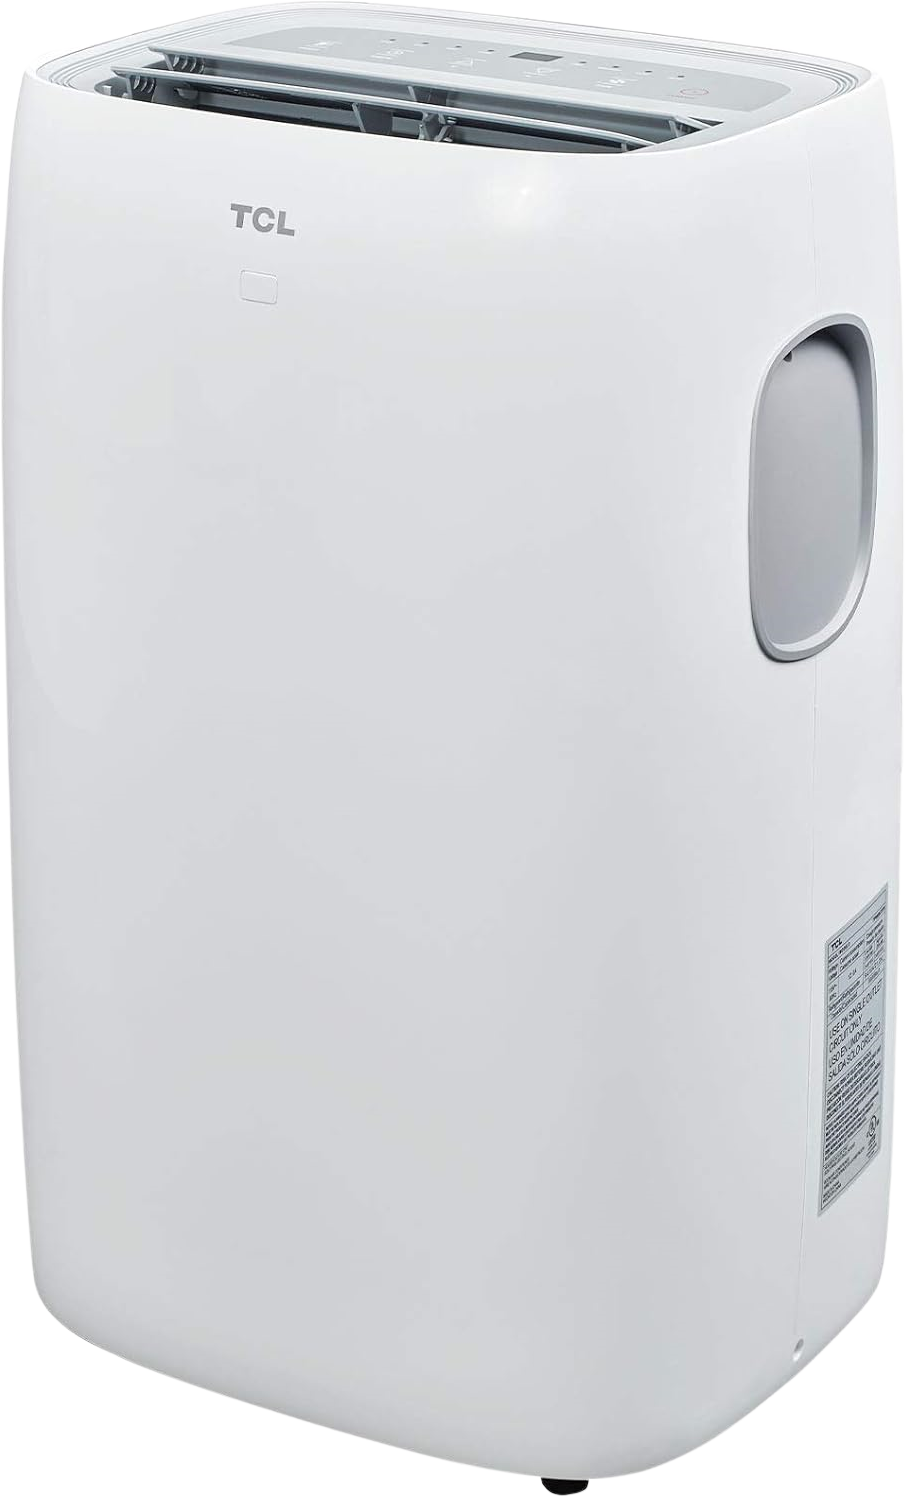 TCL, TCL 8,000 BTU 3-In-1 Portable Air Conditioner Covers 350 sq. ft. Remote Control Wi-Fi Smart App 8P93 New